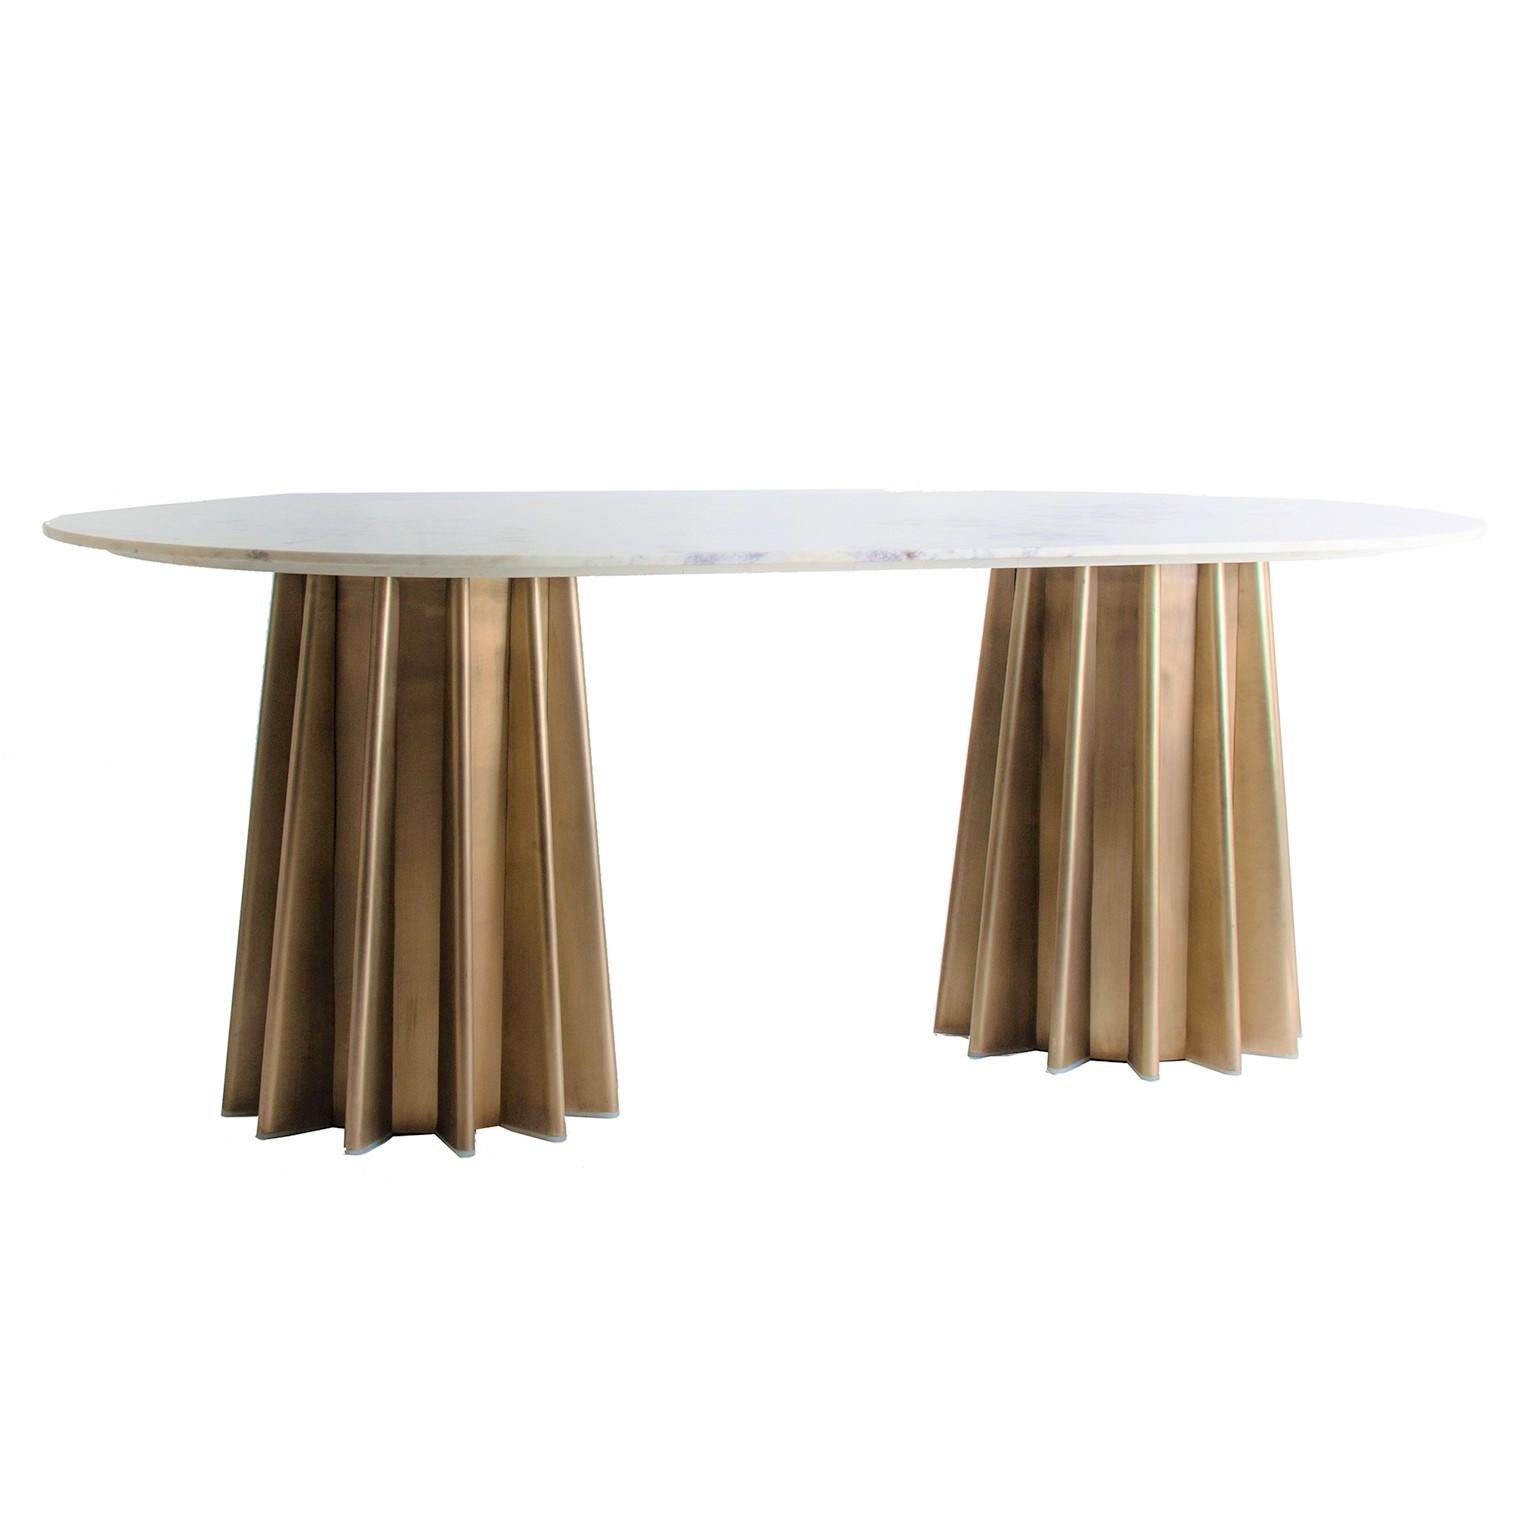 Italian design style oval dining table consisting of a graphic gilded metal feet with an oval white marble tray.